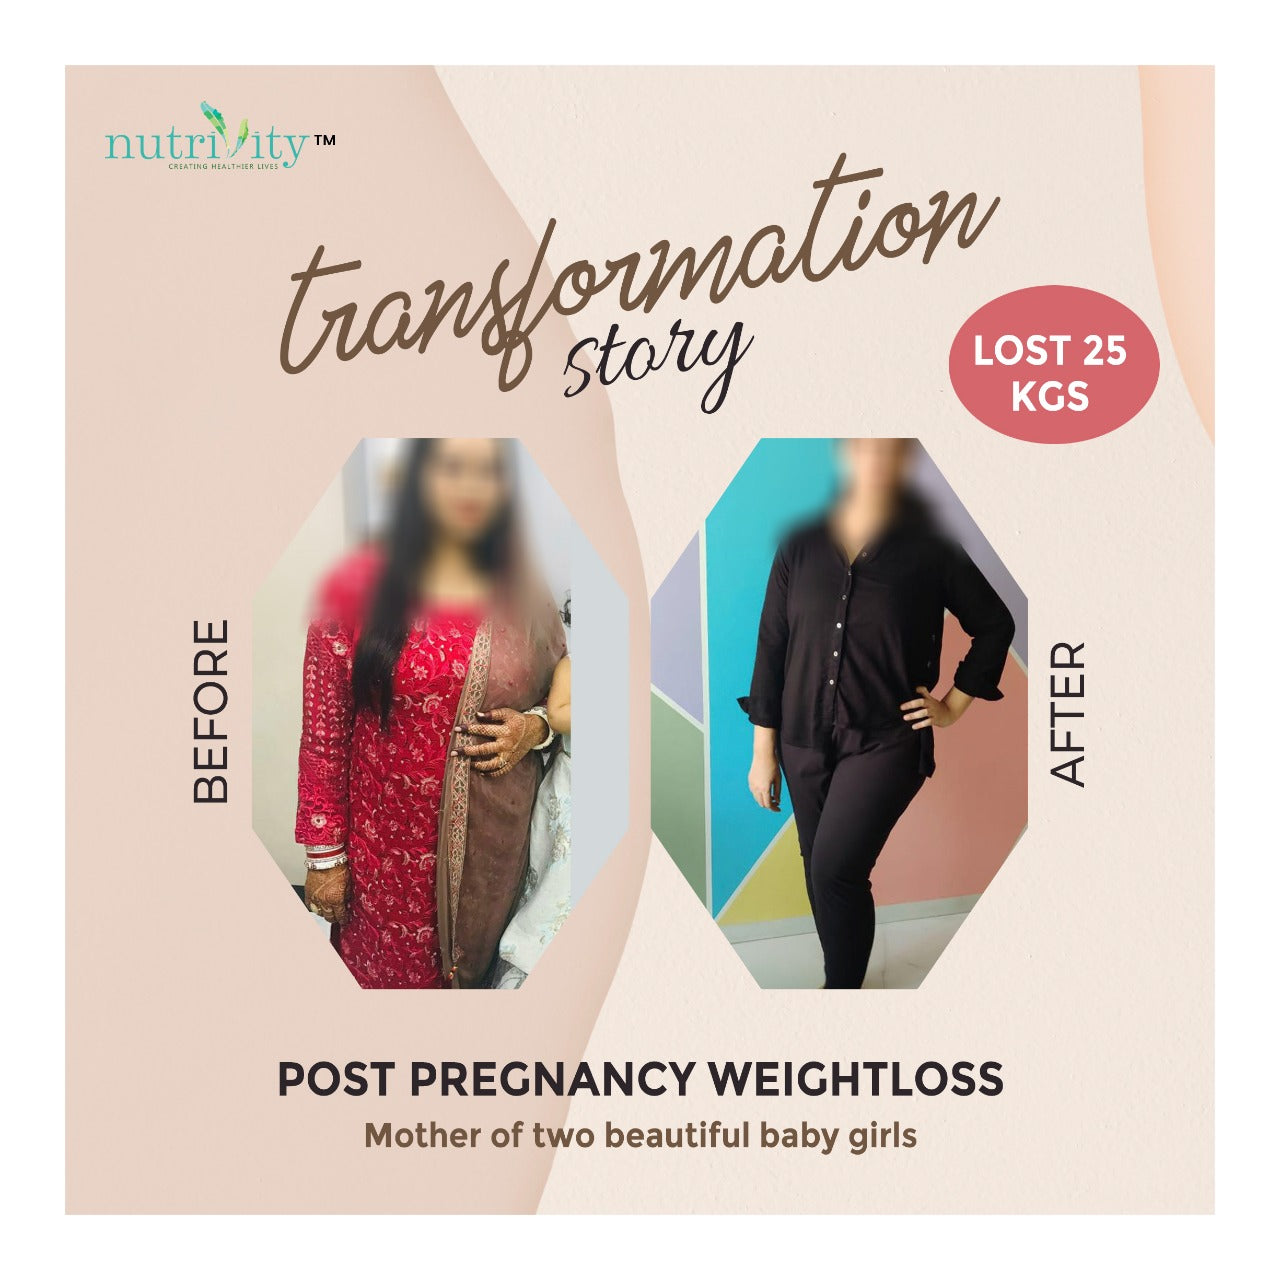 Post Pregnancy weight loss of a client